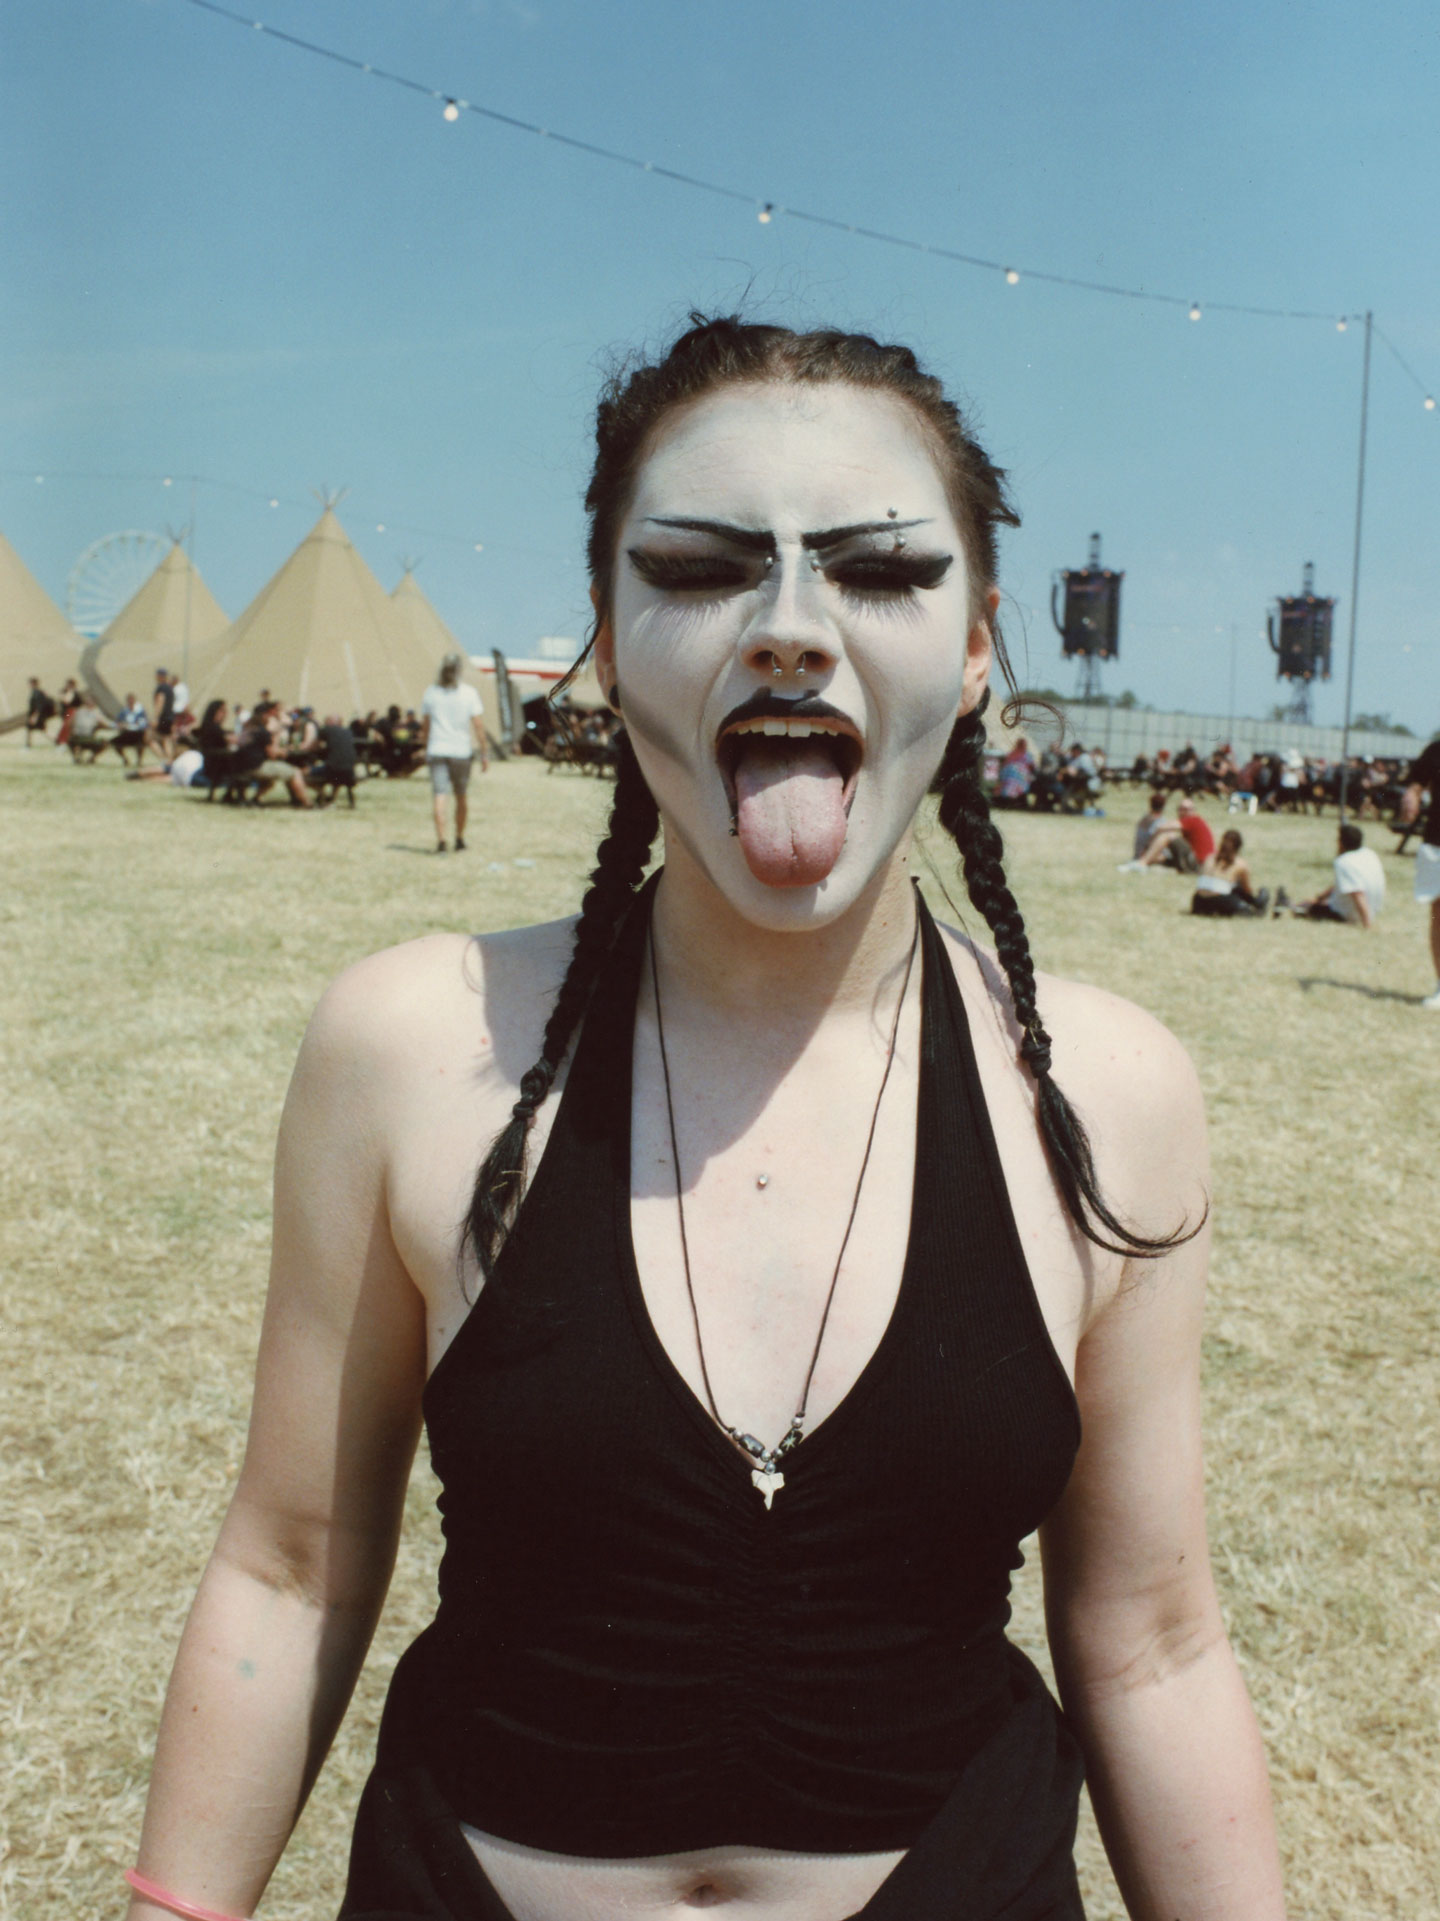 a teen girl with plaits and white gothic face paint sticks her tongue out to camera; she is standing in a festival field with tipis and dried grass behind her